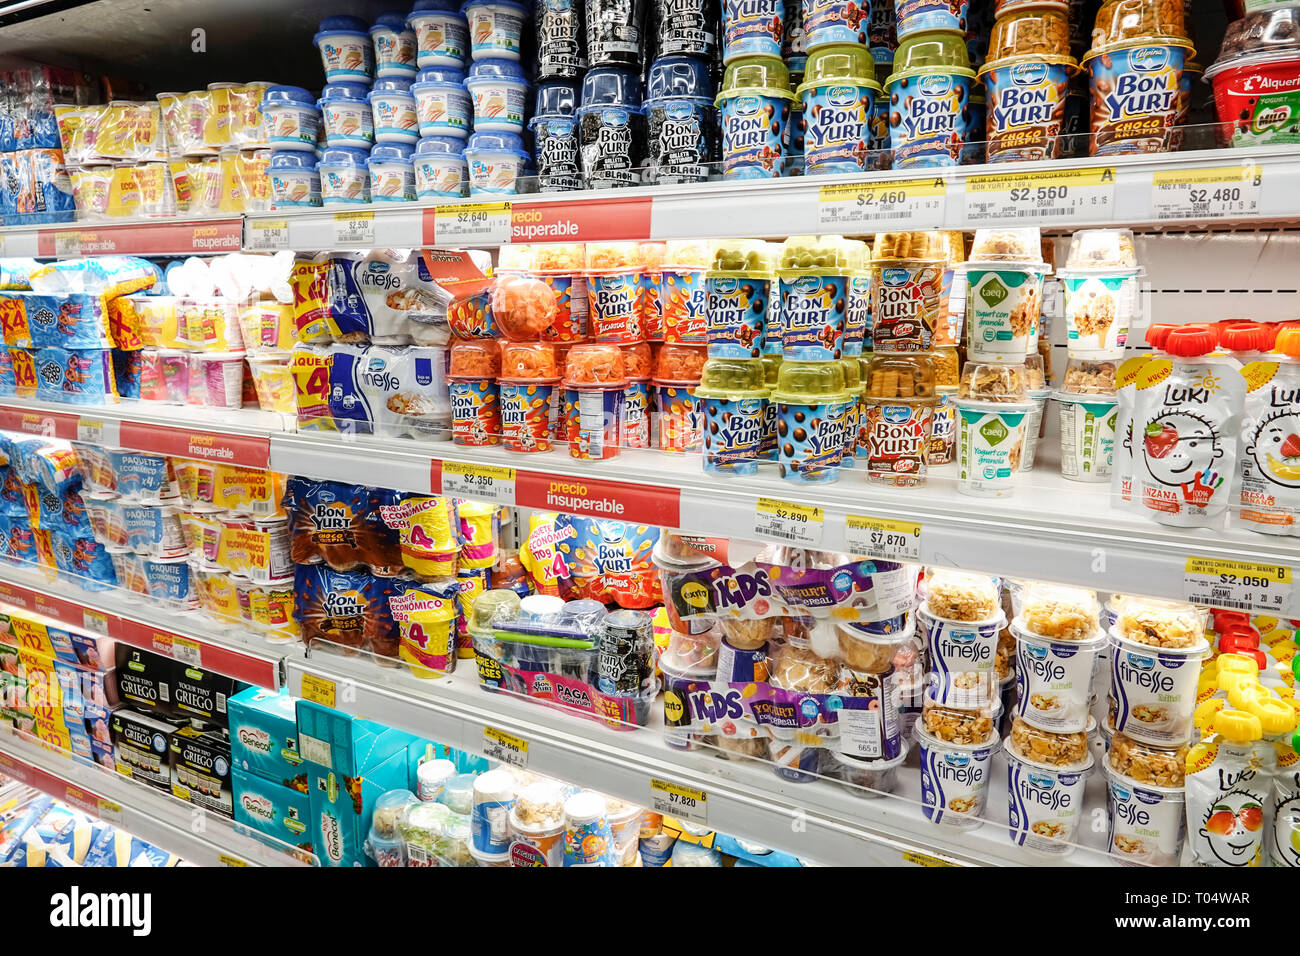 Cartagena Colombia,Center,centre,La Matuna,Exito Mercado,inside interior,grocery store supermarket,display sale food shelf shelves,packaging products, Stock Photo